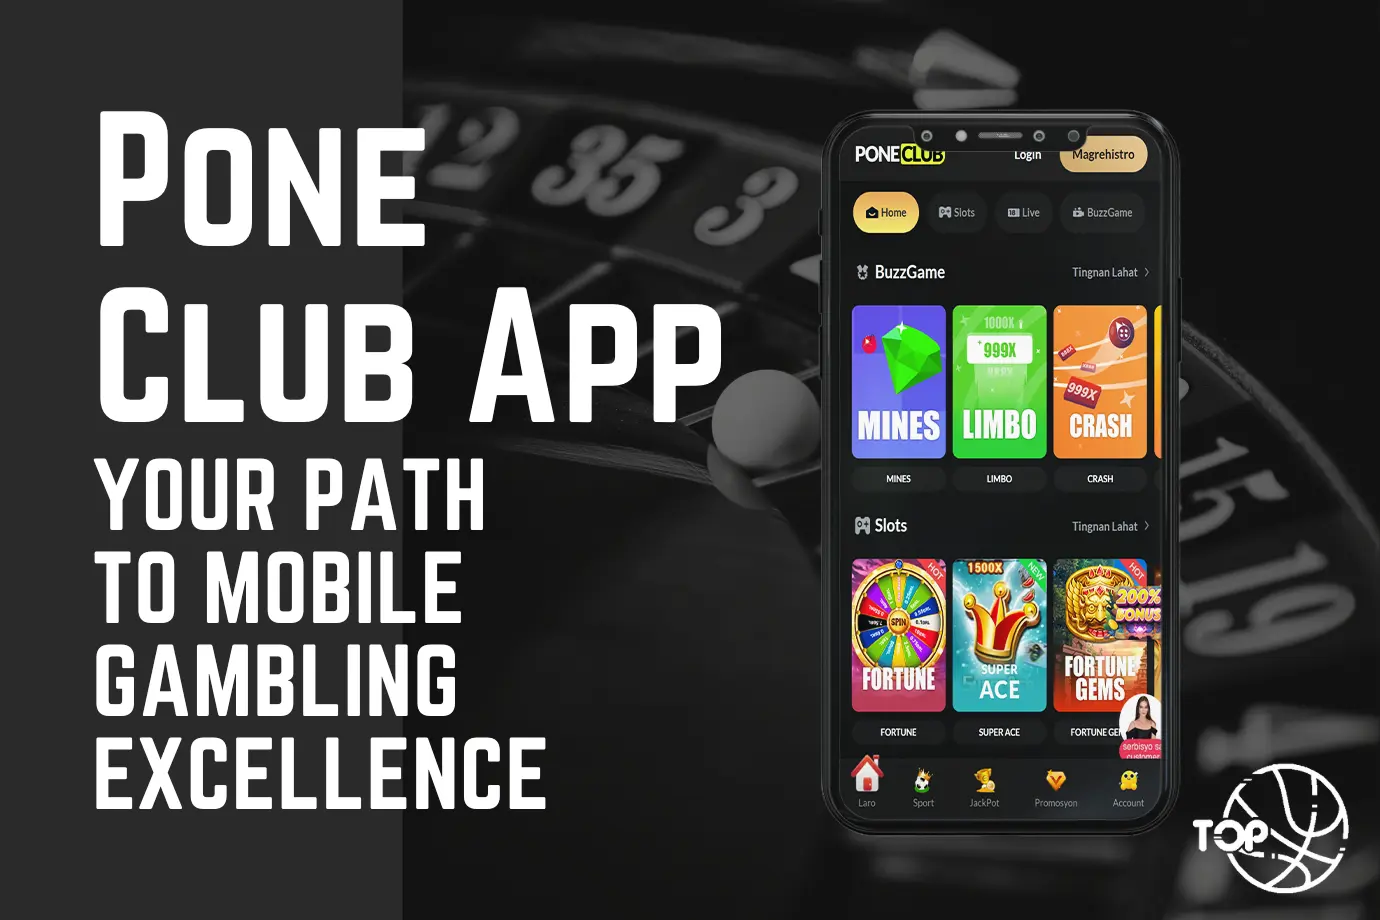 Pone Club App: Your Path to Mobile Gambling Excellence